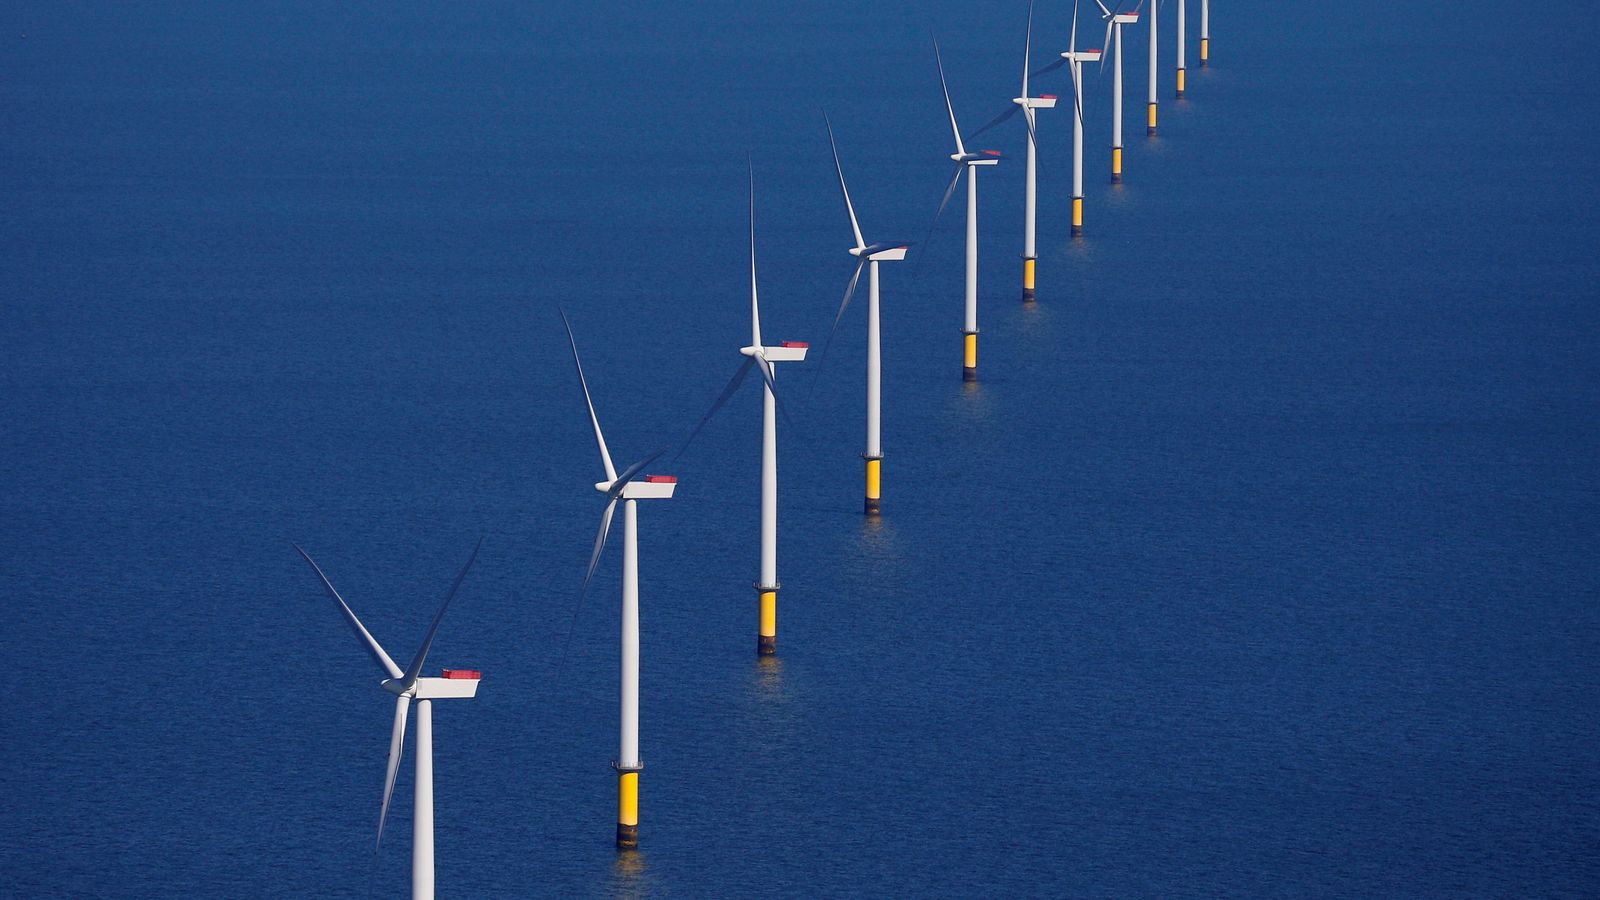 world-s-largest-offshore-wind-developer-orsted-cuts-back-production-targets-as-costs-mount